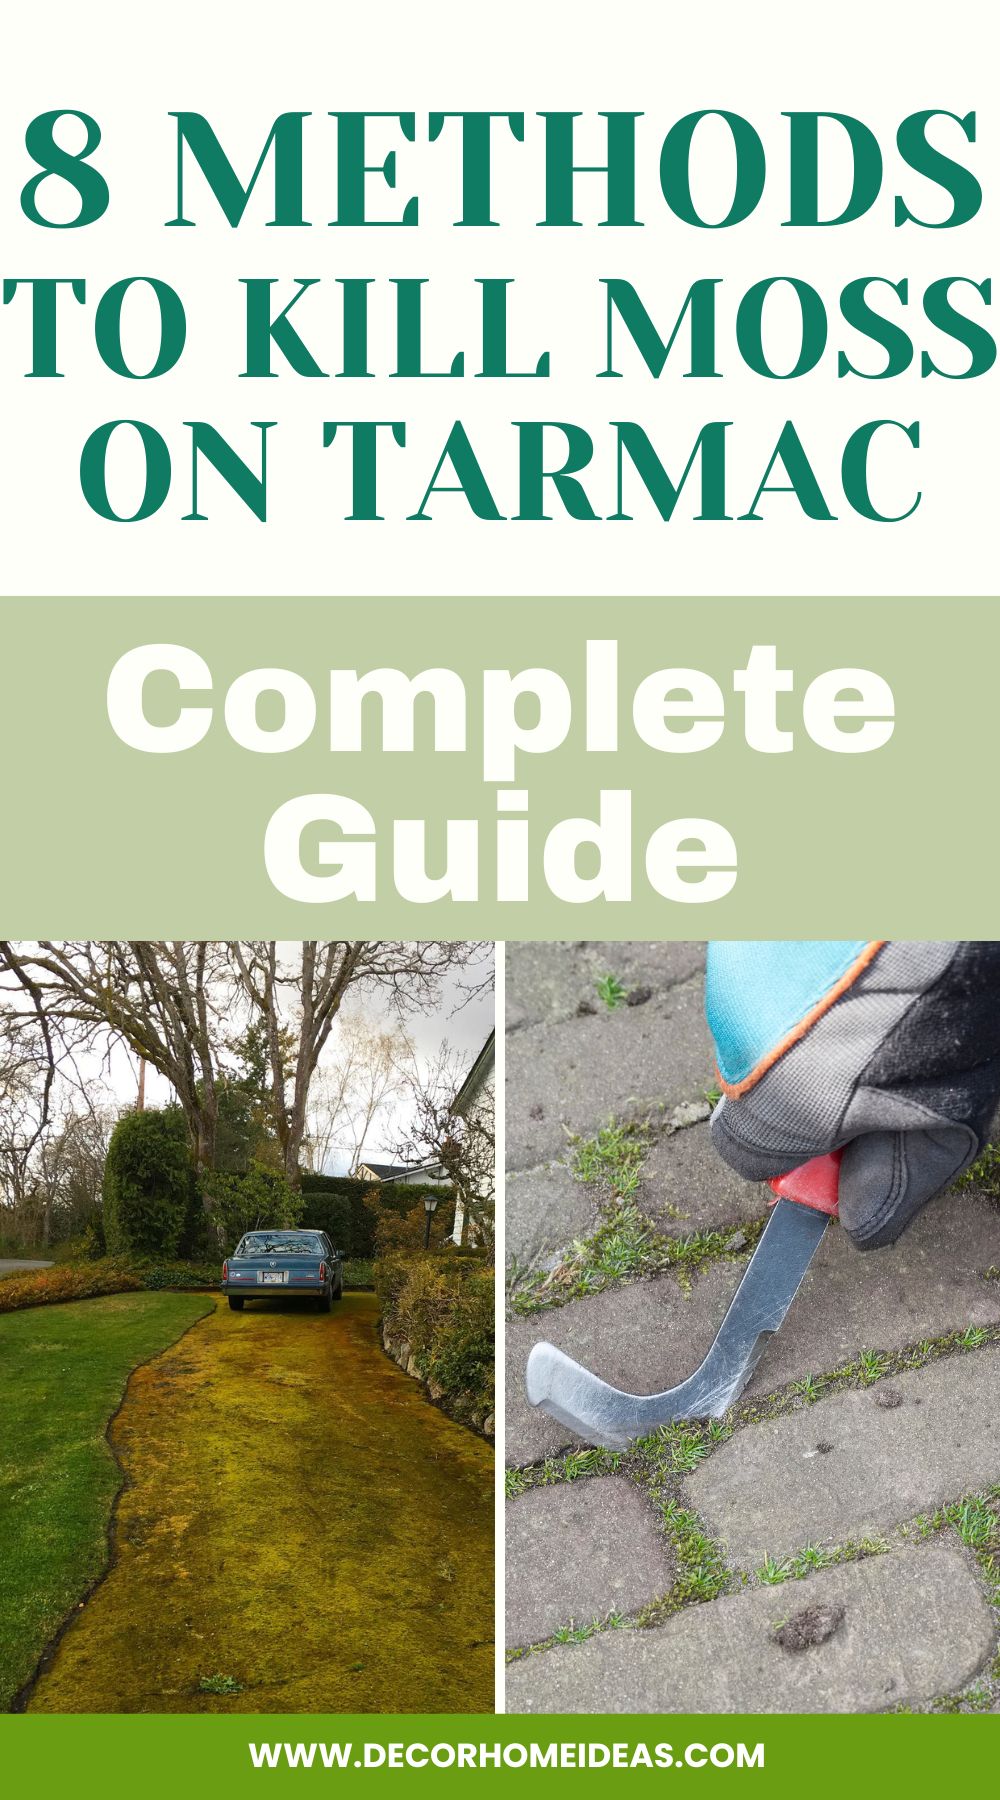 Say goodbye to moss on tarmac with this comprehensive guide featuring 8 effective methods to eradicate the problem. Learn step-by-step techniques and tips to keep your tarmac surfaces moss-free and looking their best.